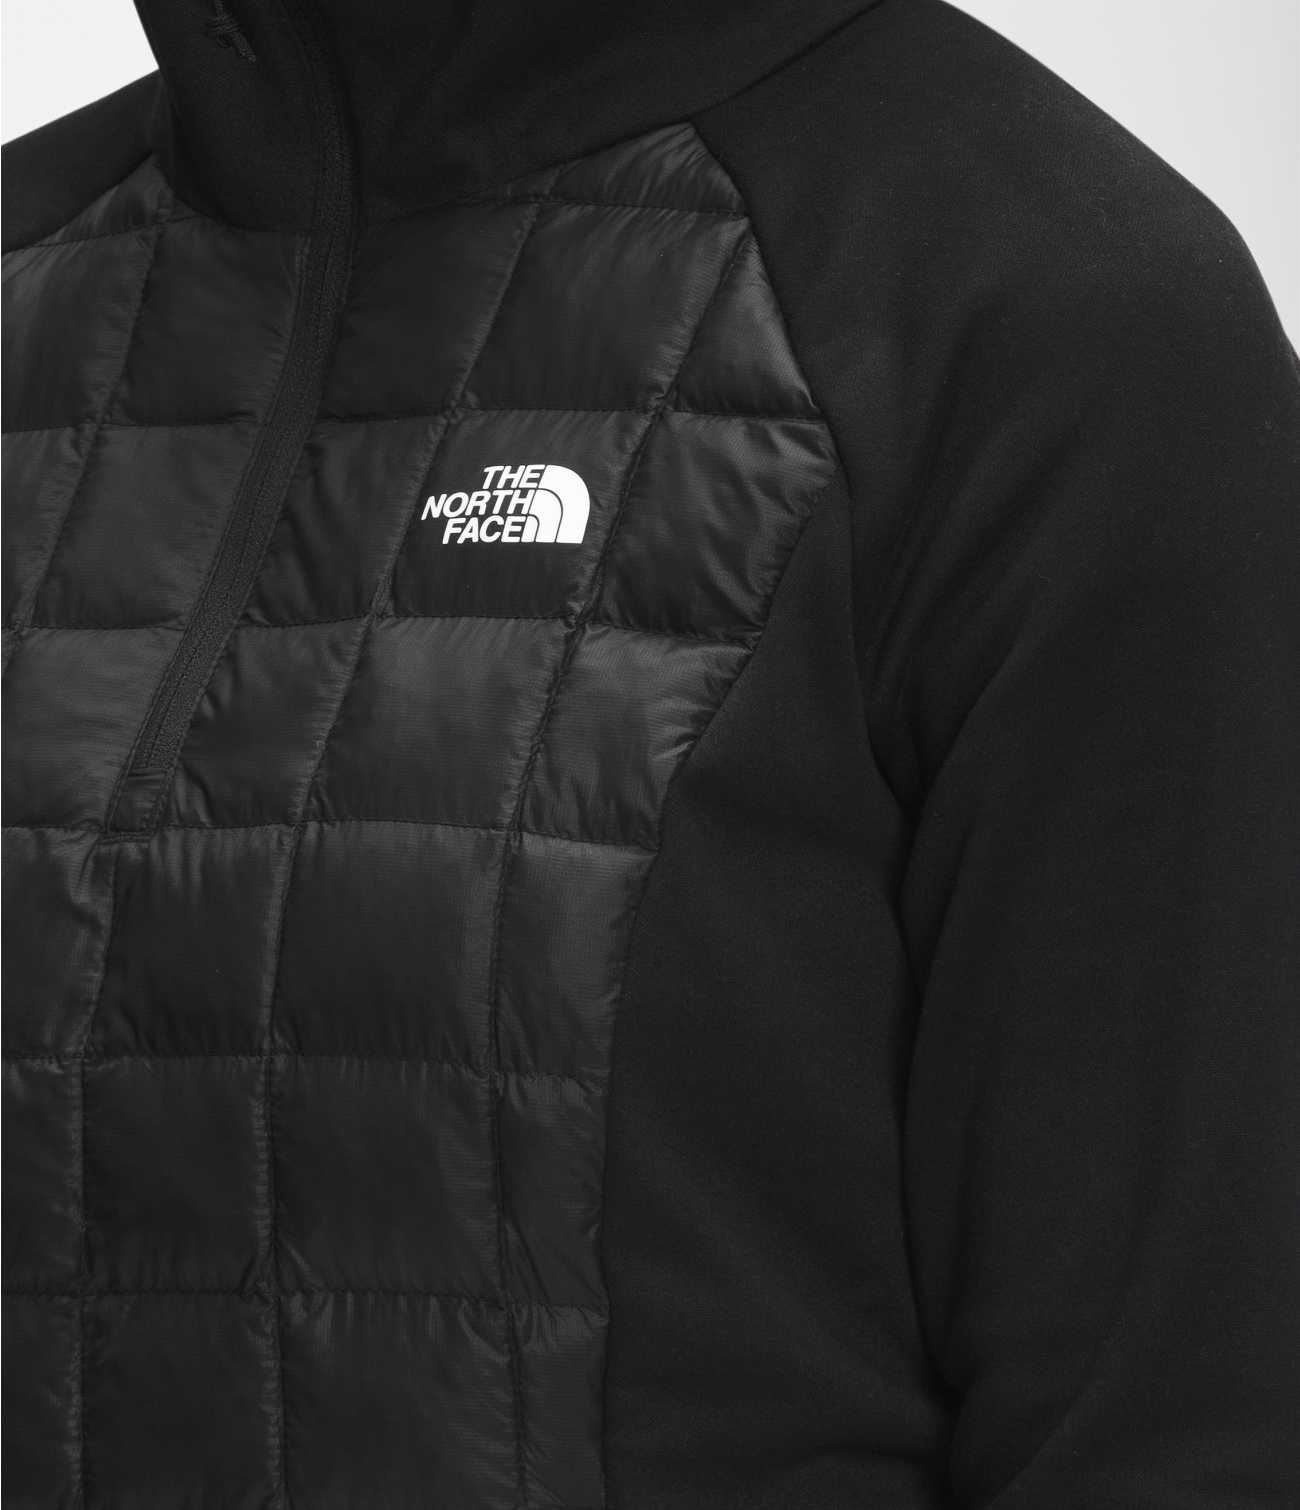 The North Face Renewed - WOMEN'S THERMOBALL HYBRID JACKET